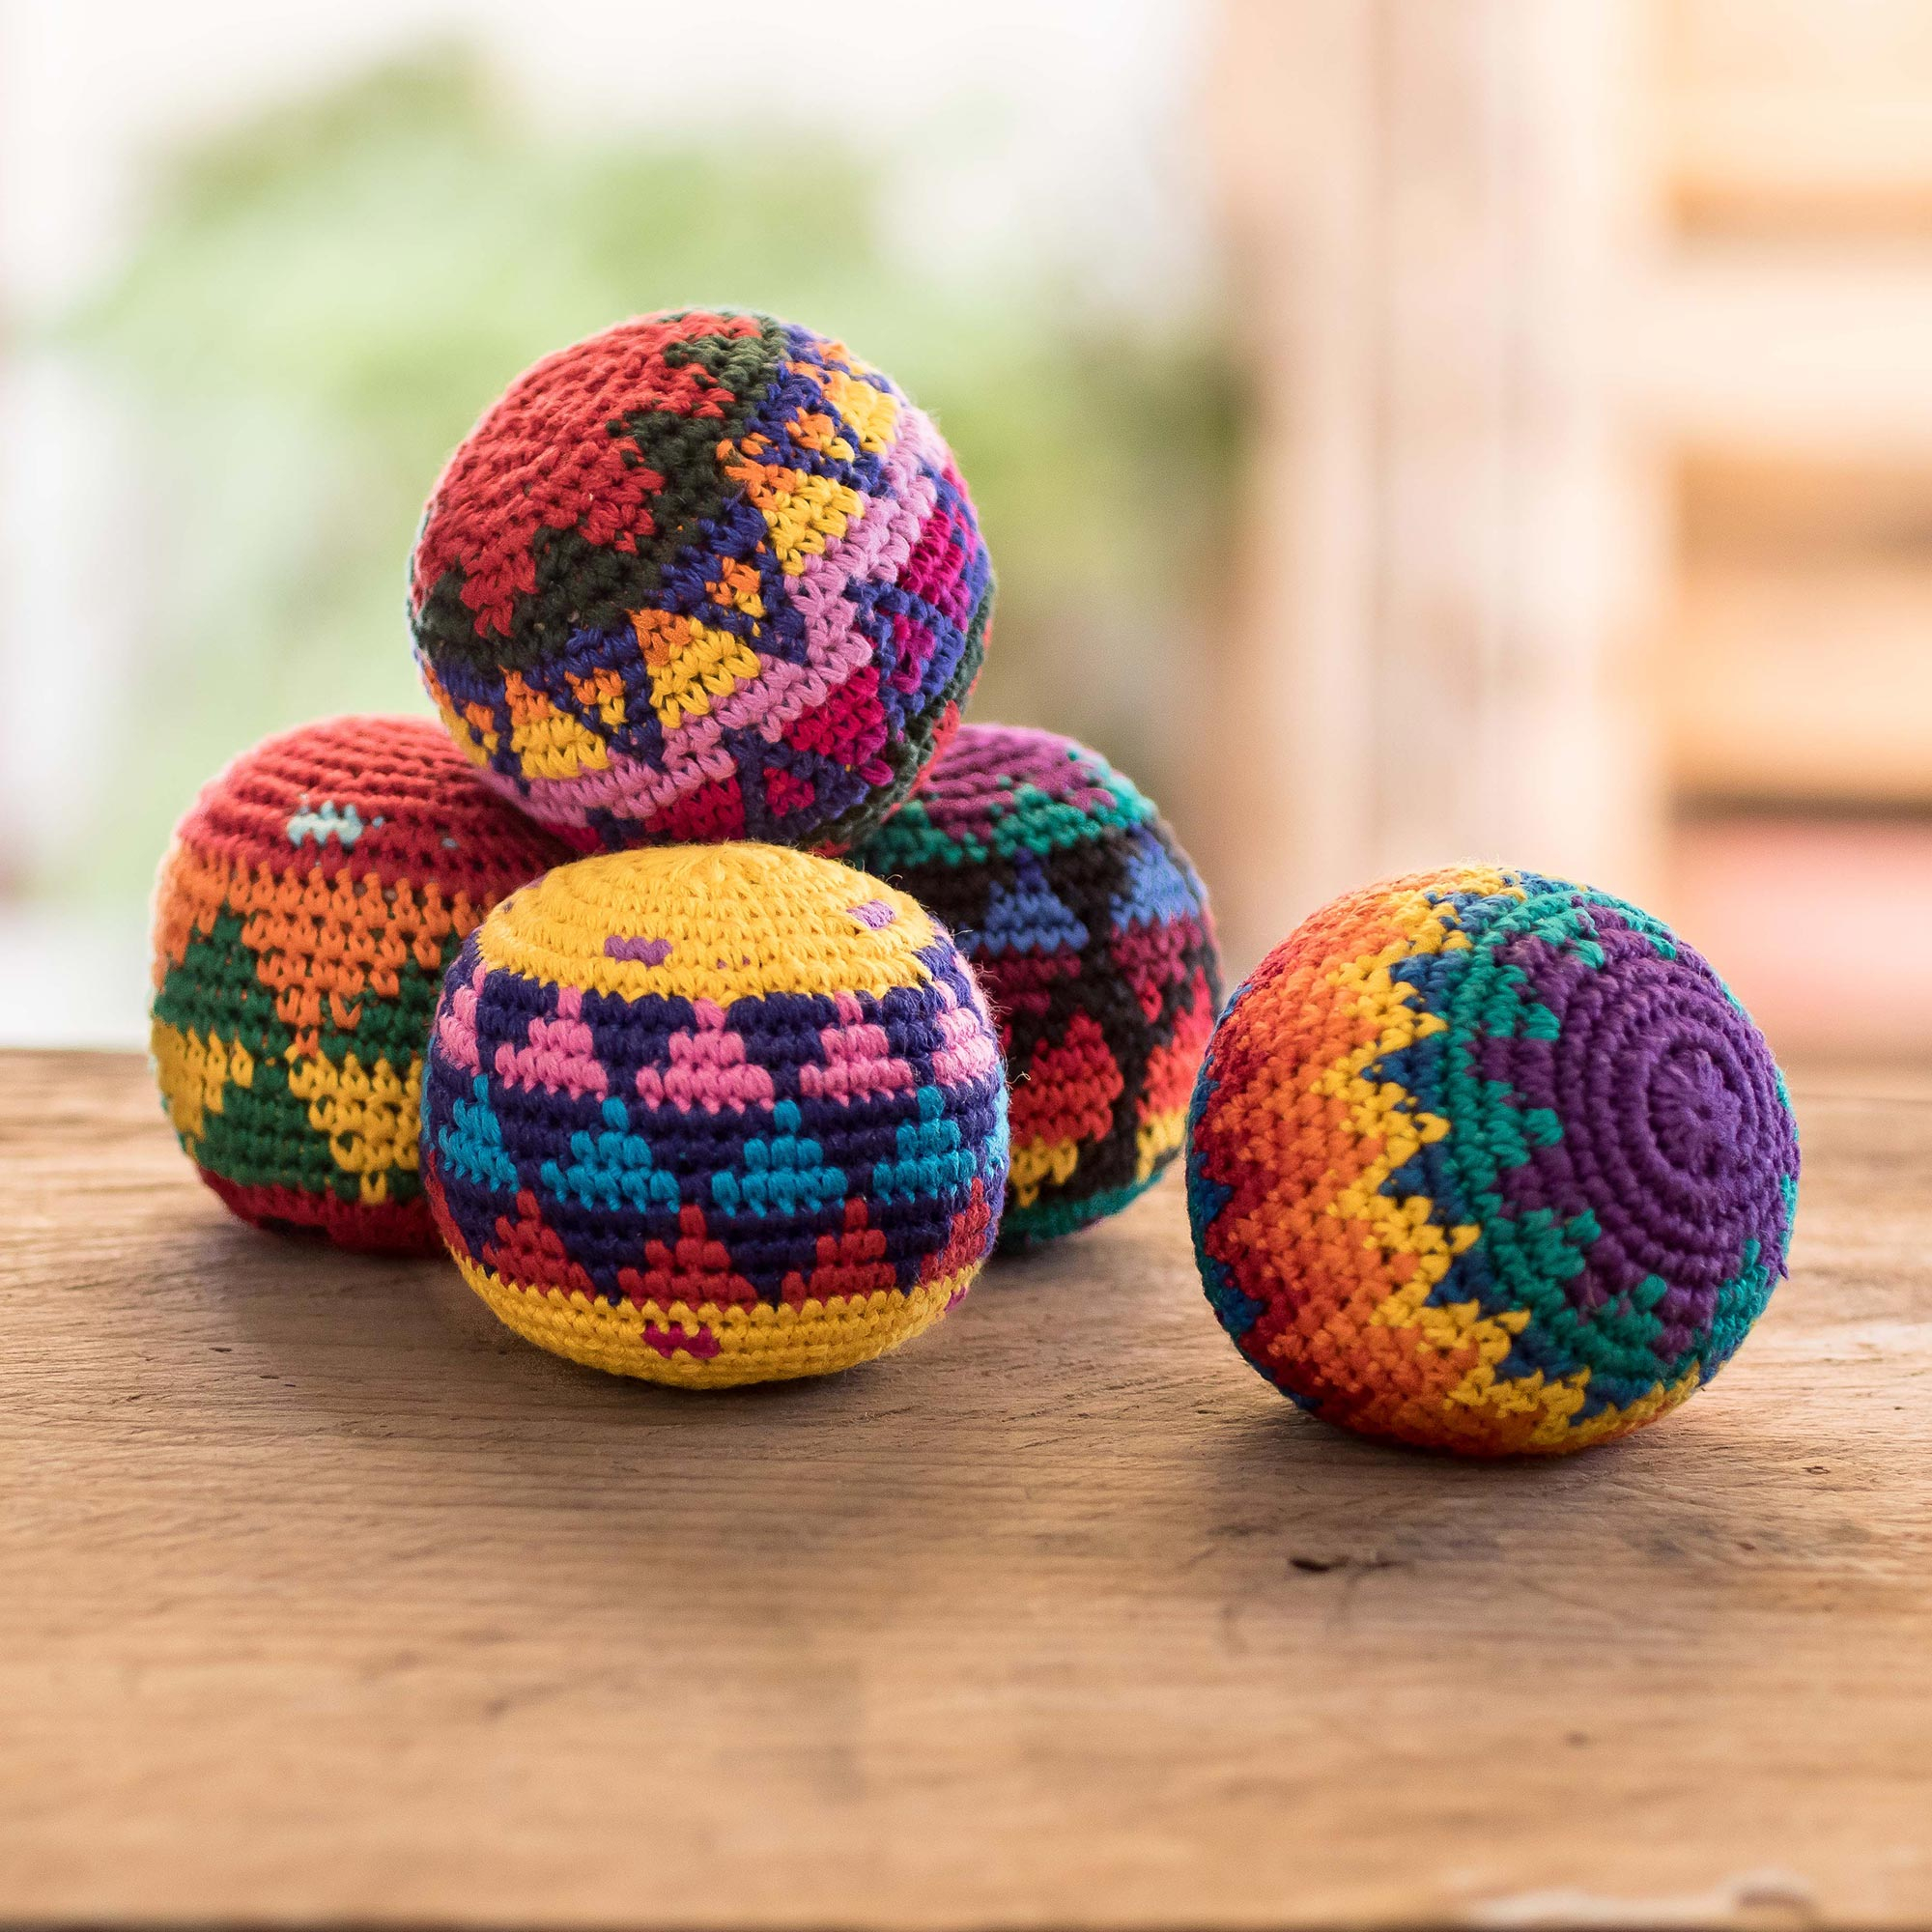 Footbag hacky sack hand-made pellet filled Freestyle FREE SHIP 